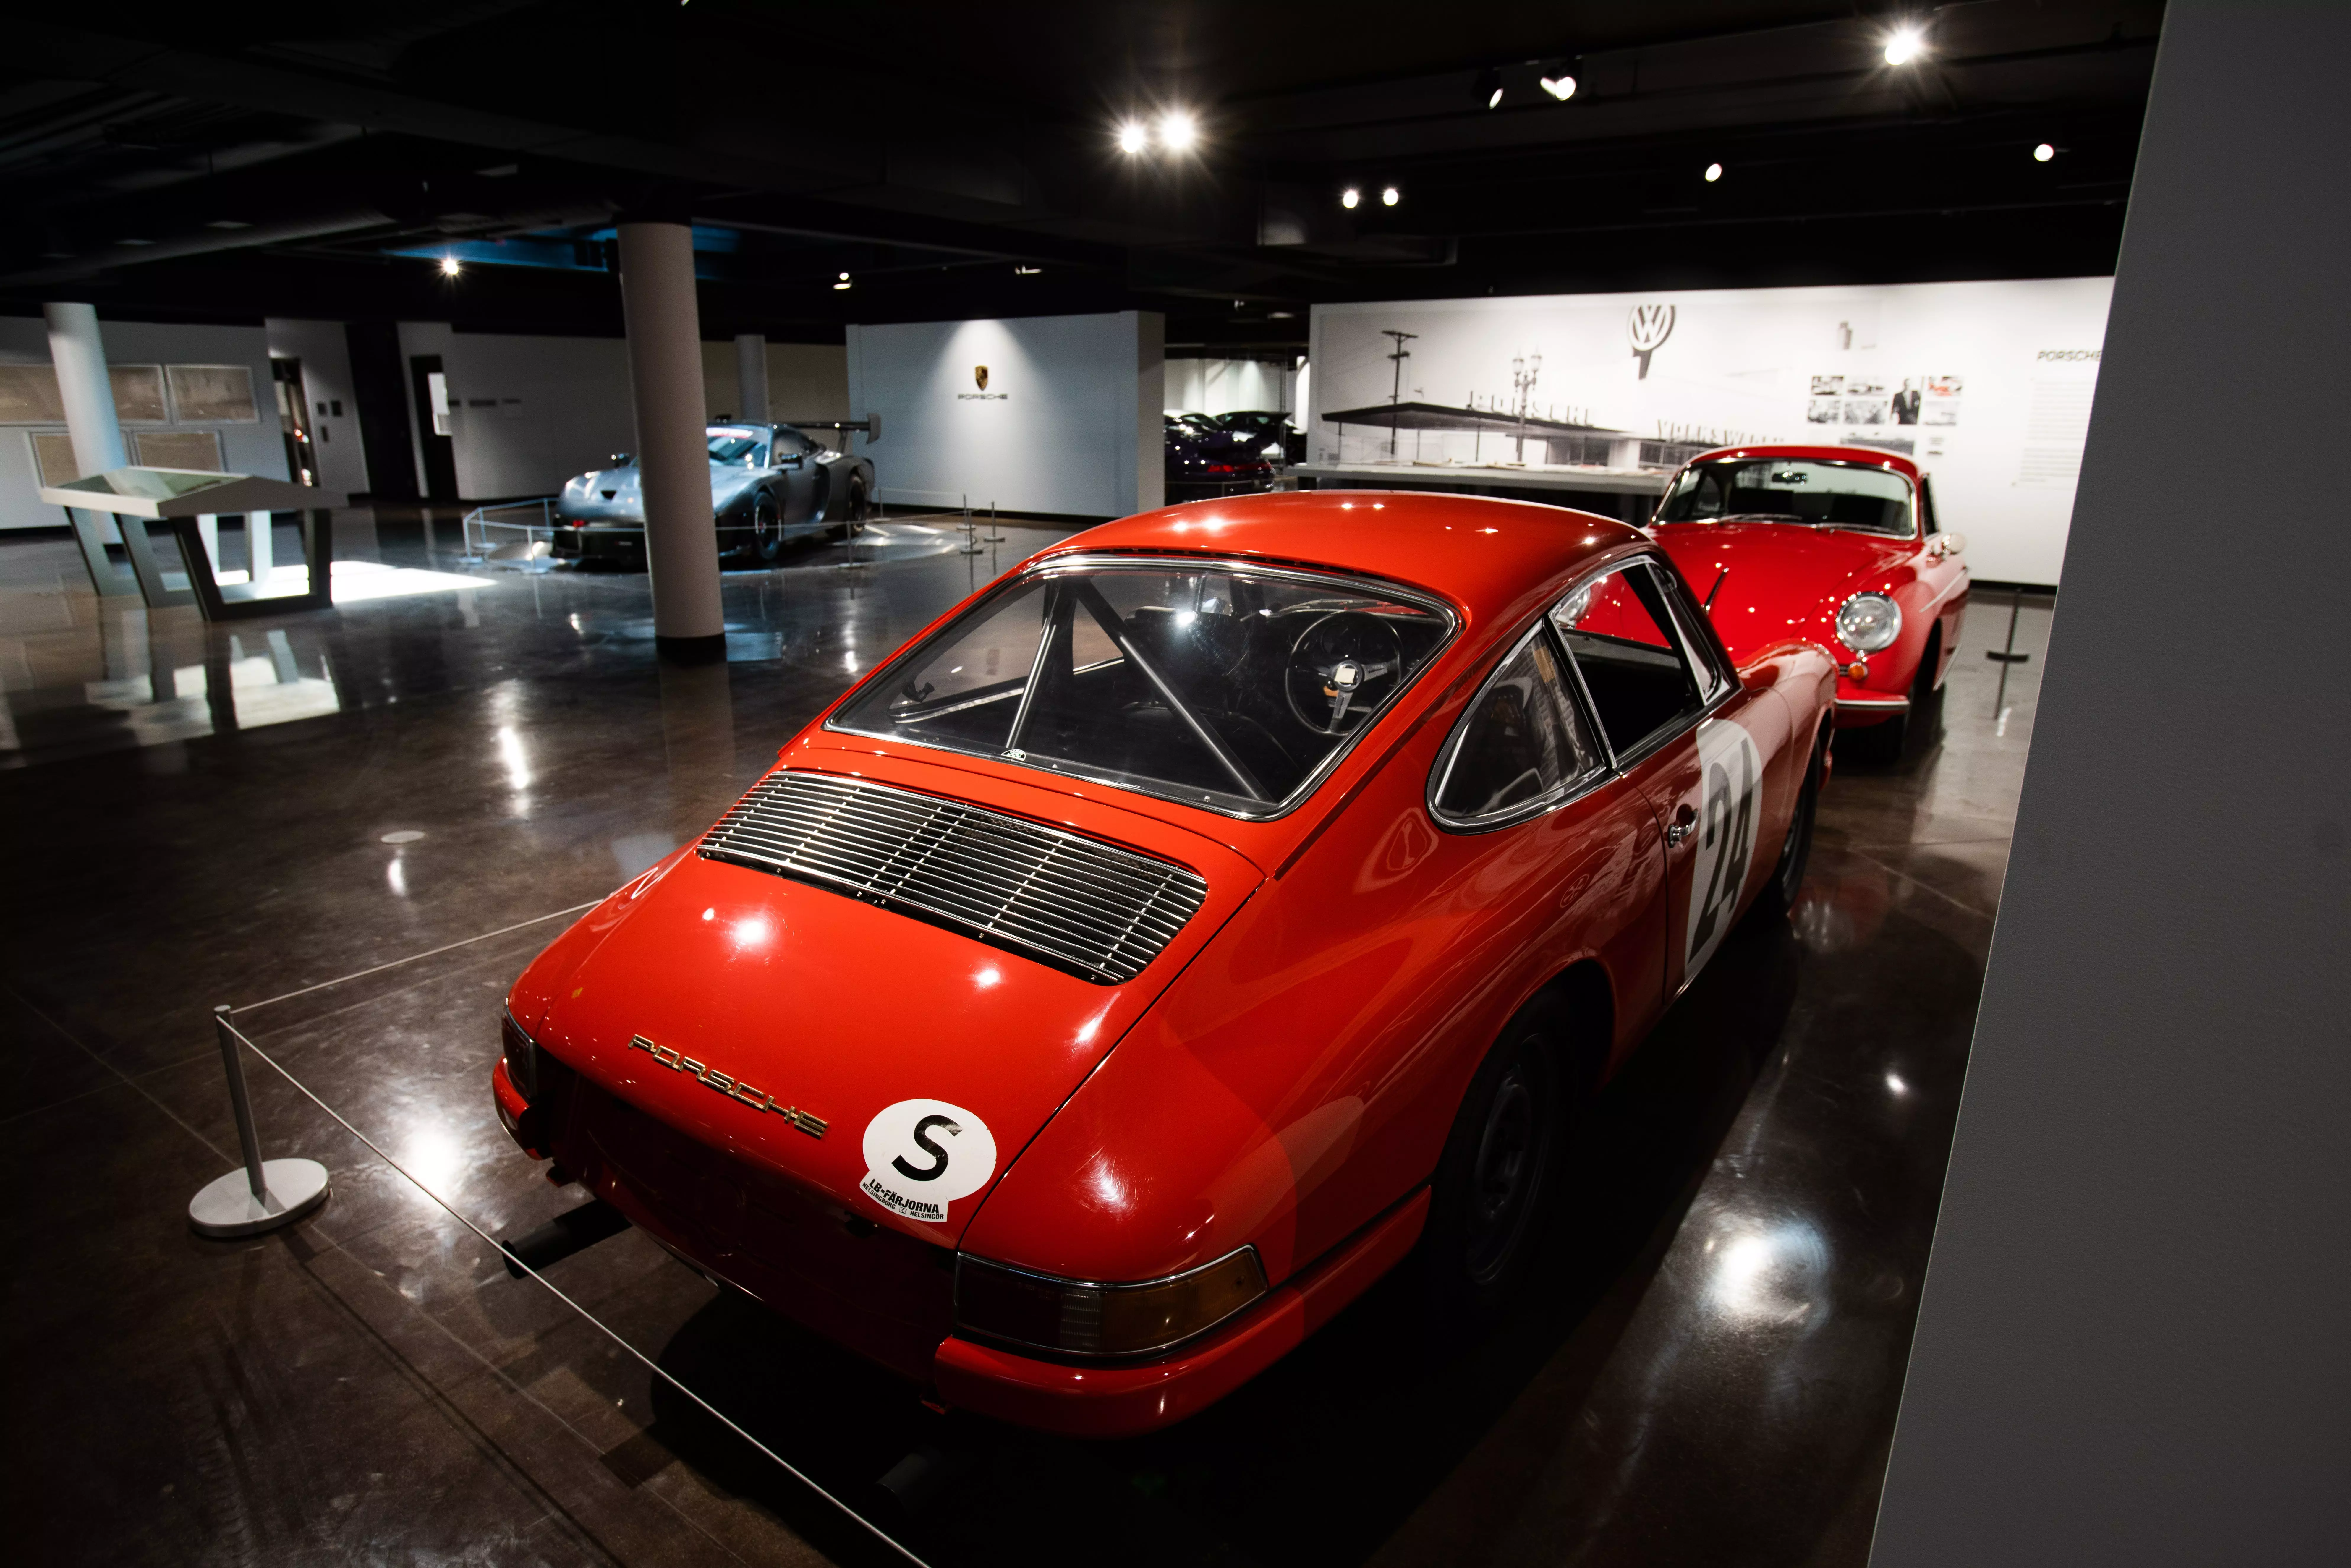 This Porsche 901 Is Lurking With More Great Cars in This Cool Dealership Museum